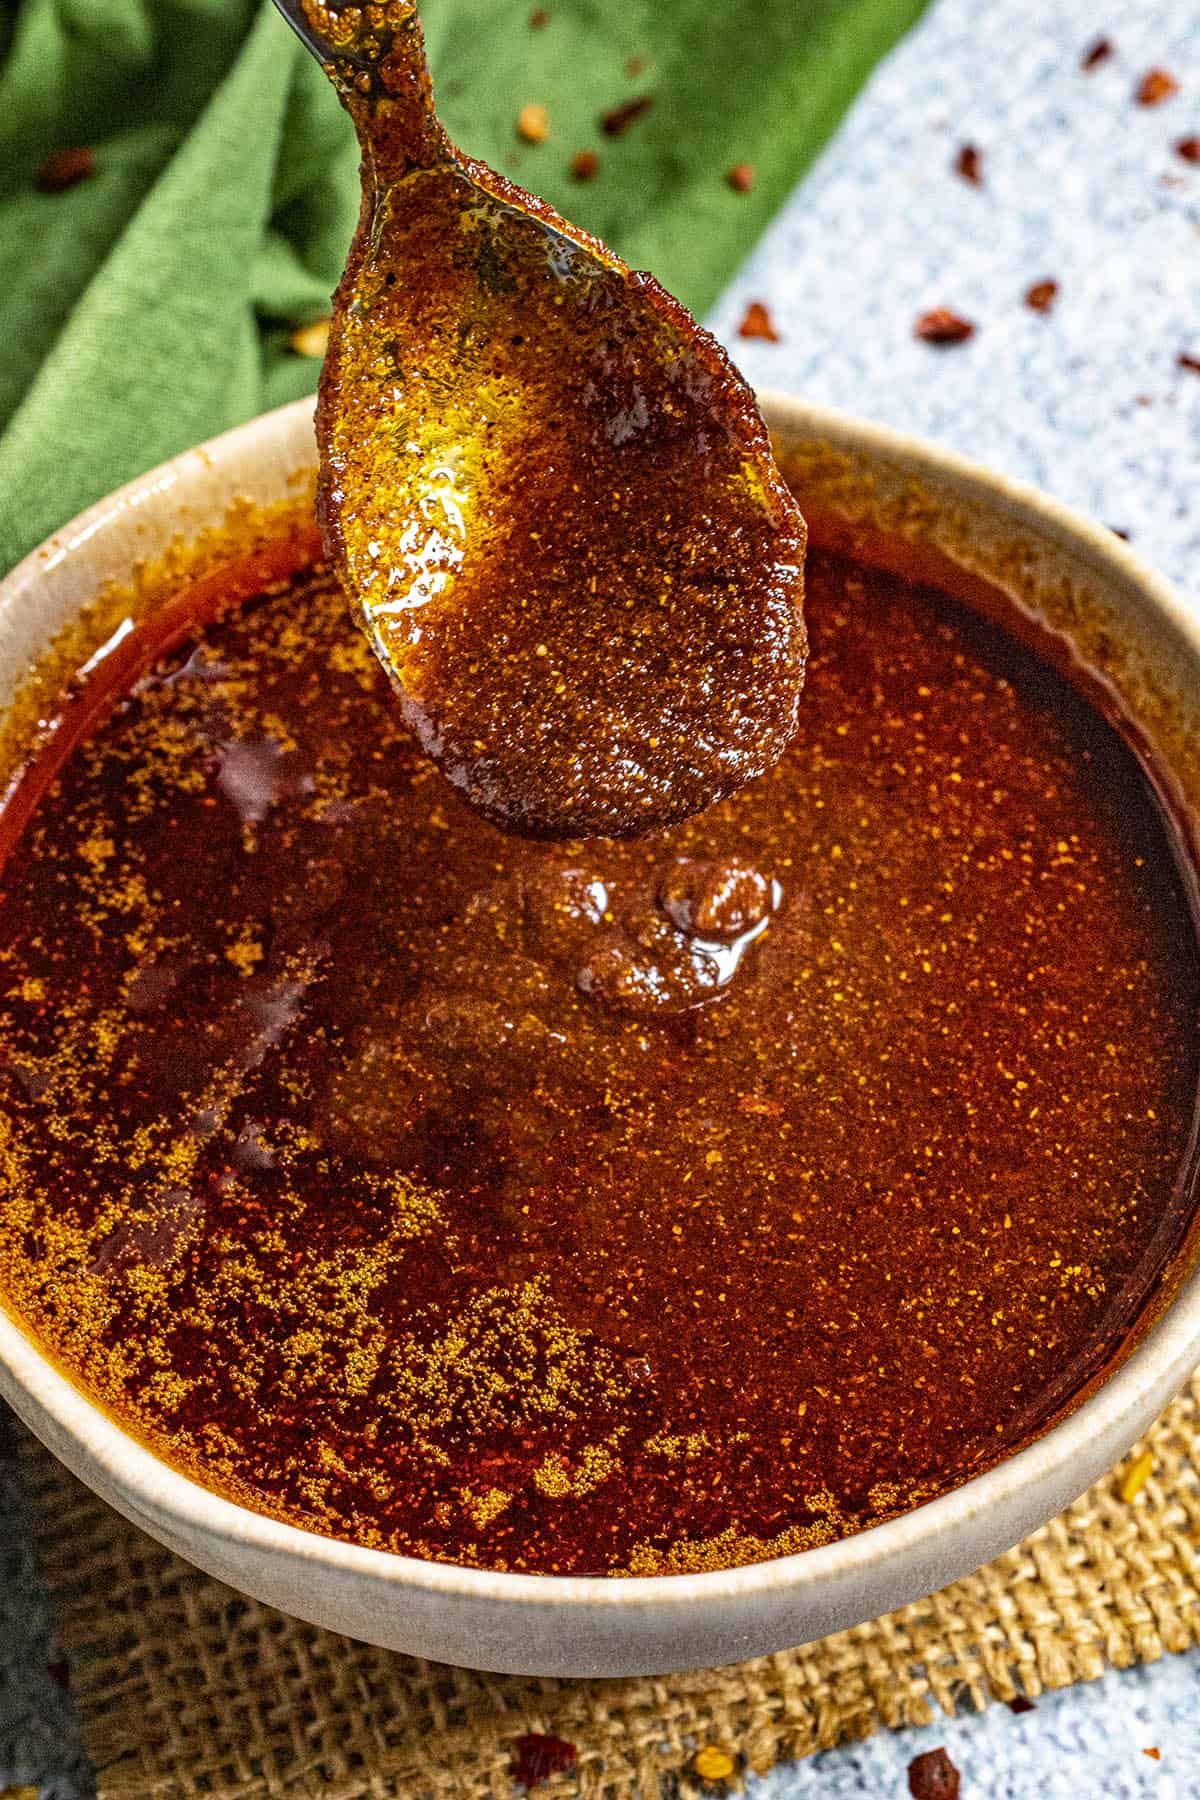 Nashville Hot Sauce dripping from a spoon